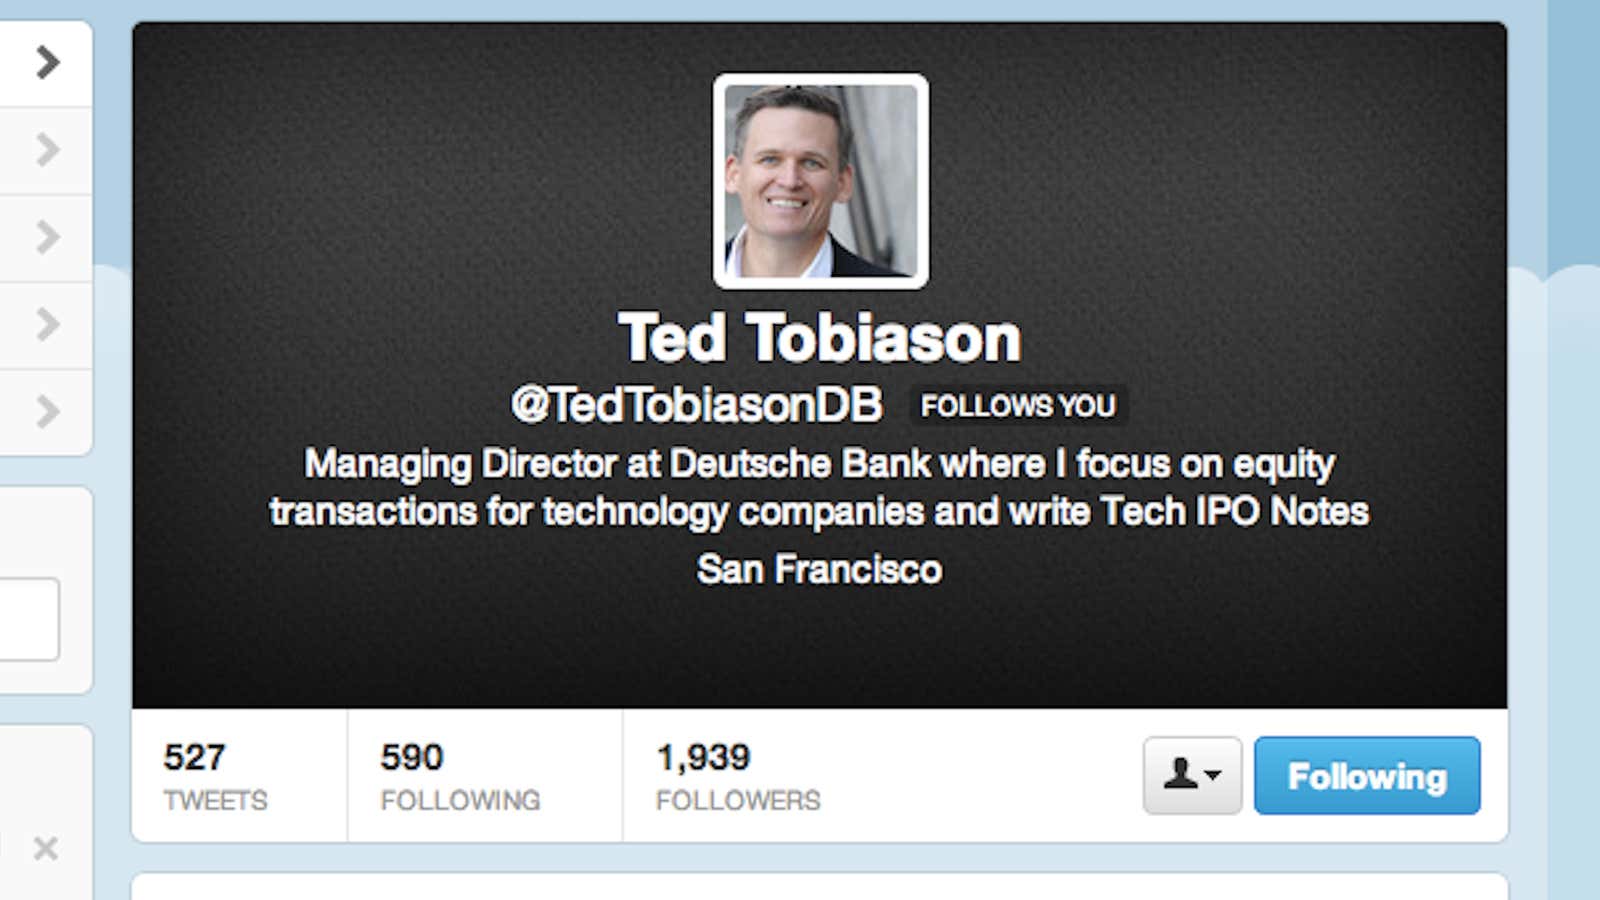 Ted Tobiason is one of the very few bankers who tweets about his work.